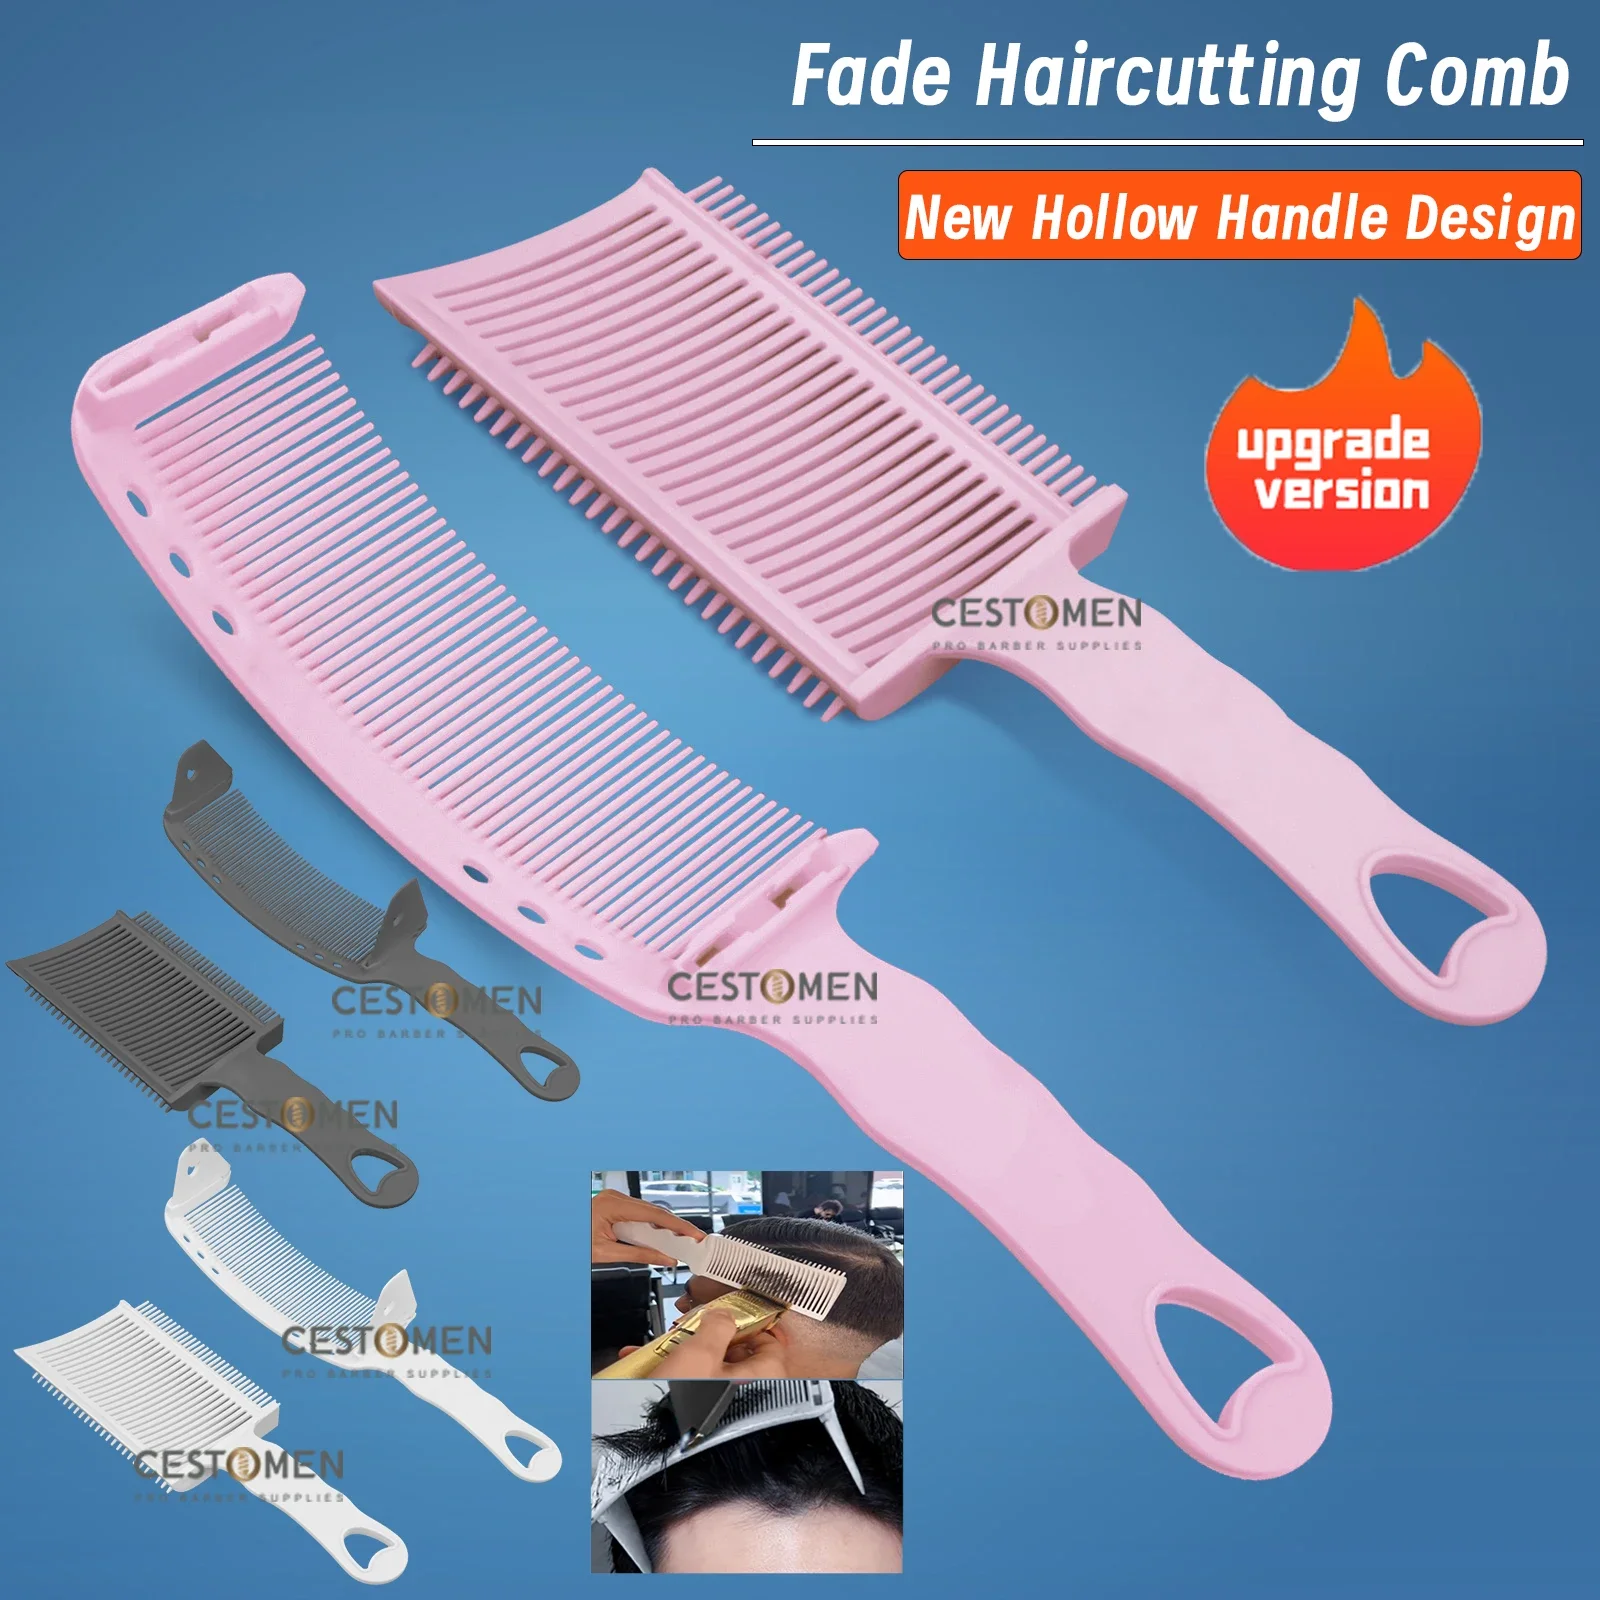 New Style Fading Comb Professional Barber Clipper Blending Flat Top Hair Cutting Comb For Men Heat Resistant Salon Styling Tools fading comb pro barber clipper blending flat top hair cutting comb adjustable s arc design hair clipper comb hairdresser tools